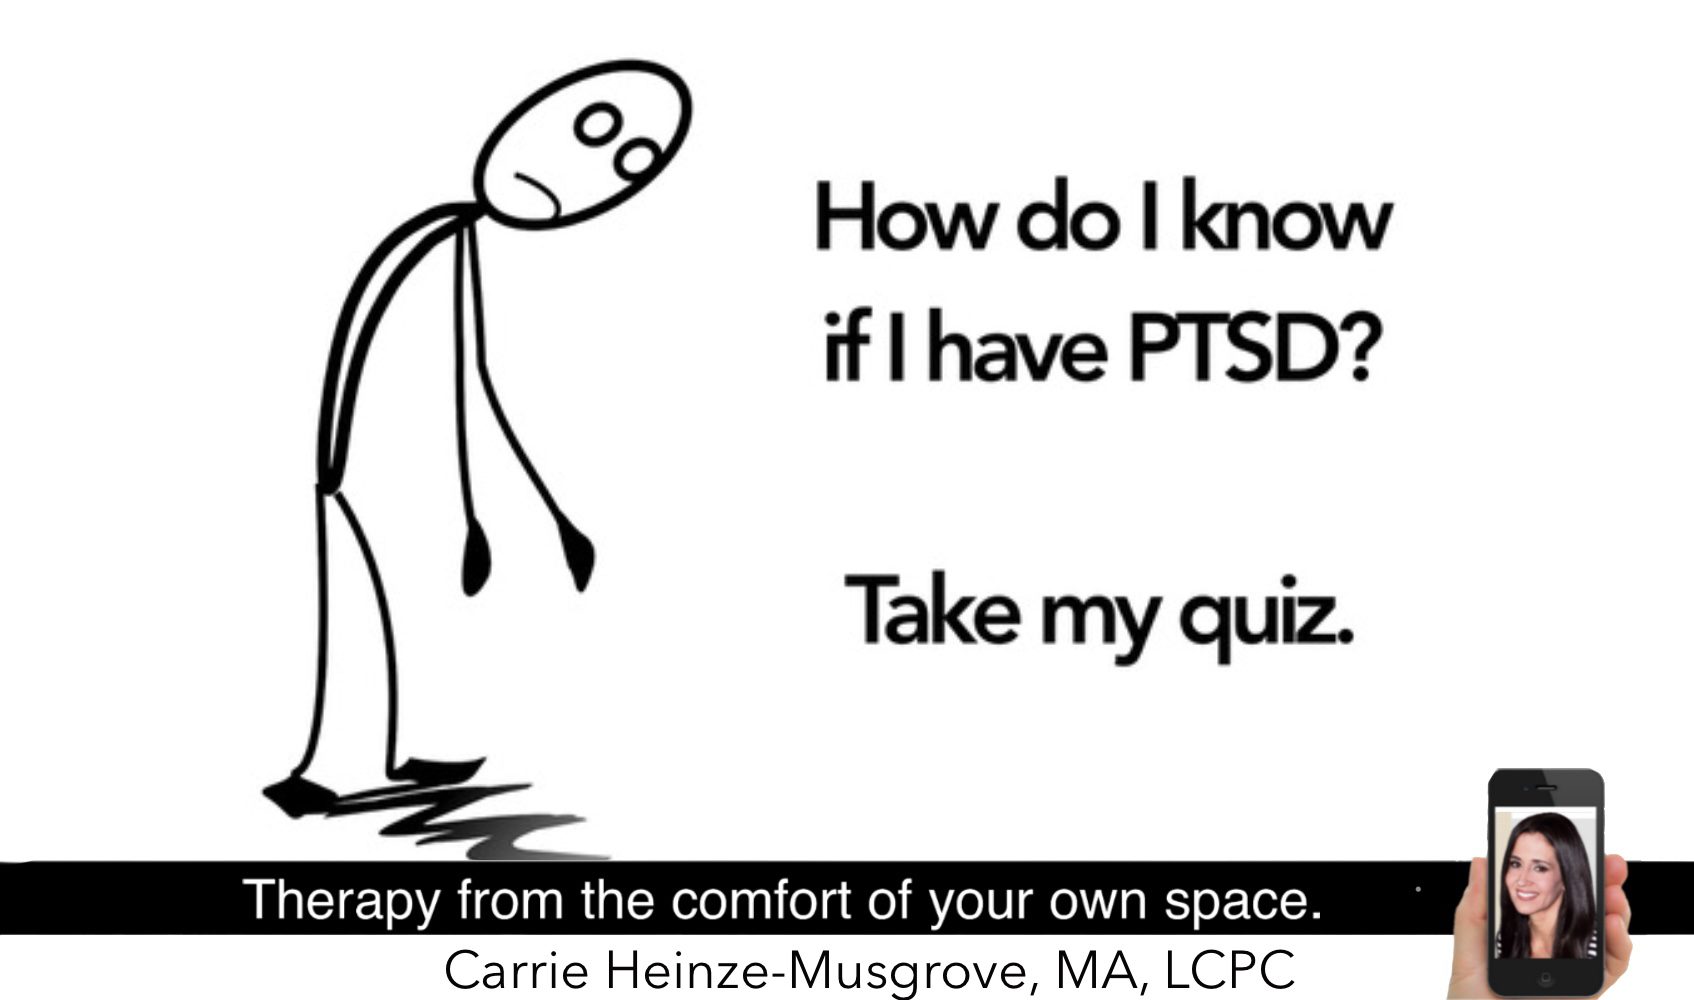 What is PTSD? Do you think it affects you?